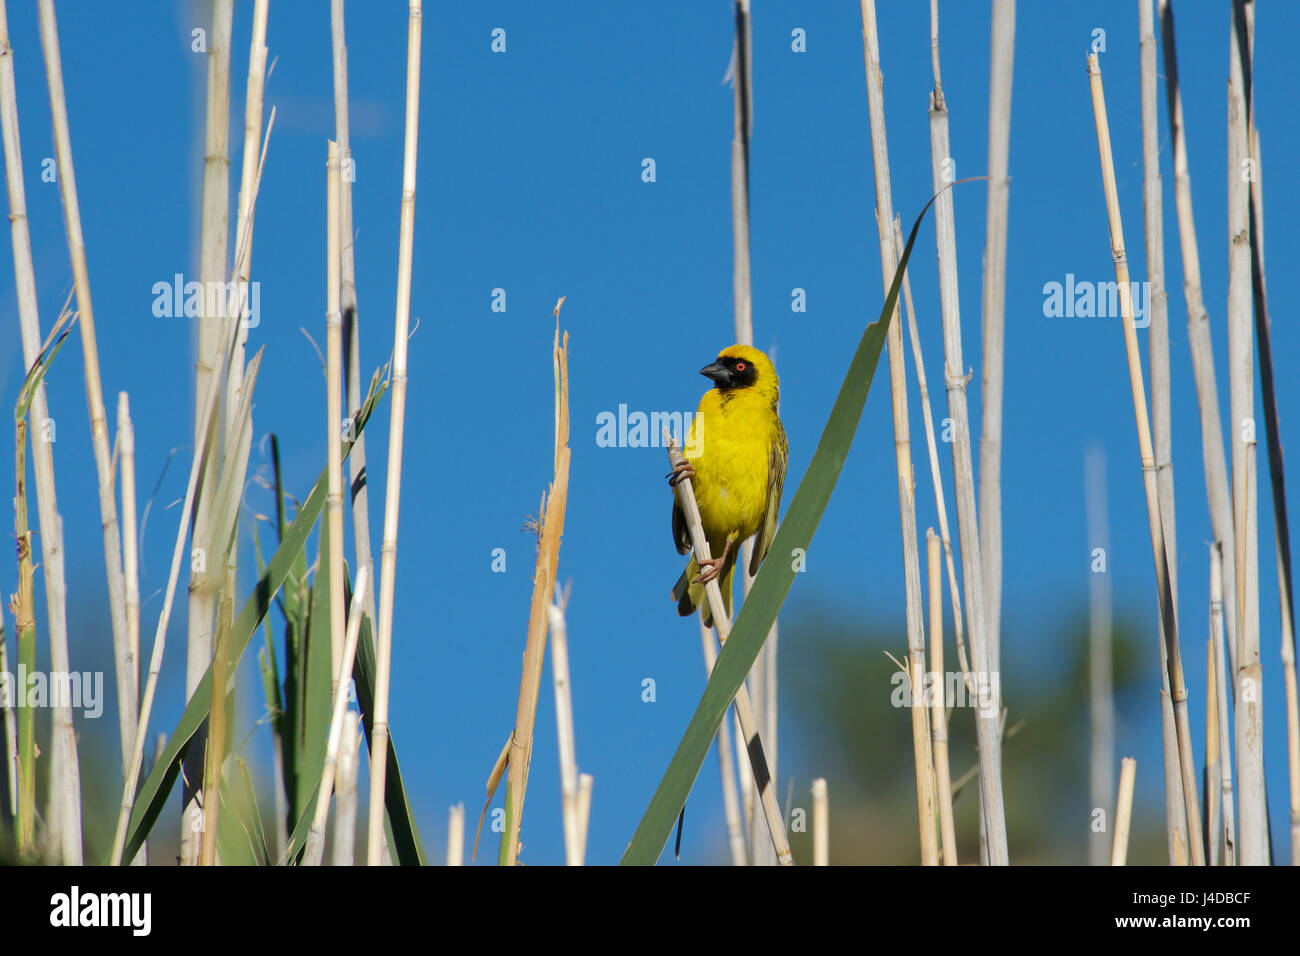 Southern Masked Weaver bird   Karoo Eastern Cape South Africa Stock Photo